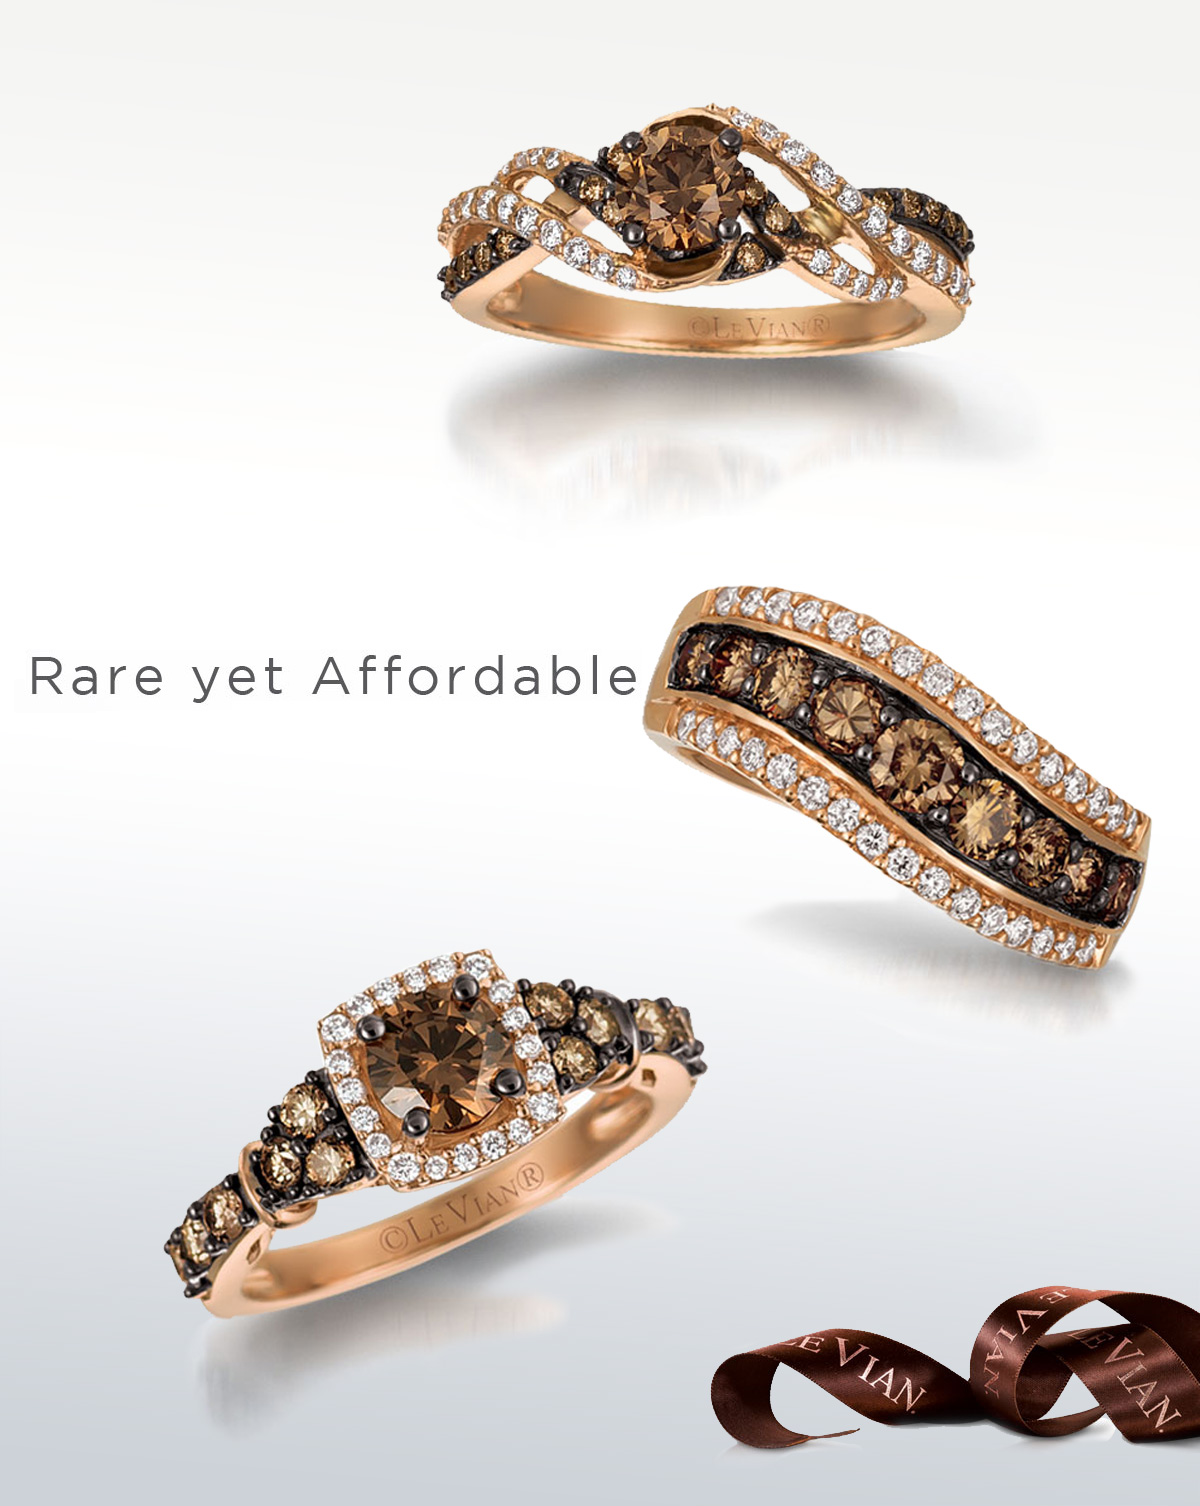 Le Vian Ring Featuring Nude And Chocolate Diamonds In 14K Strawberry